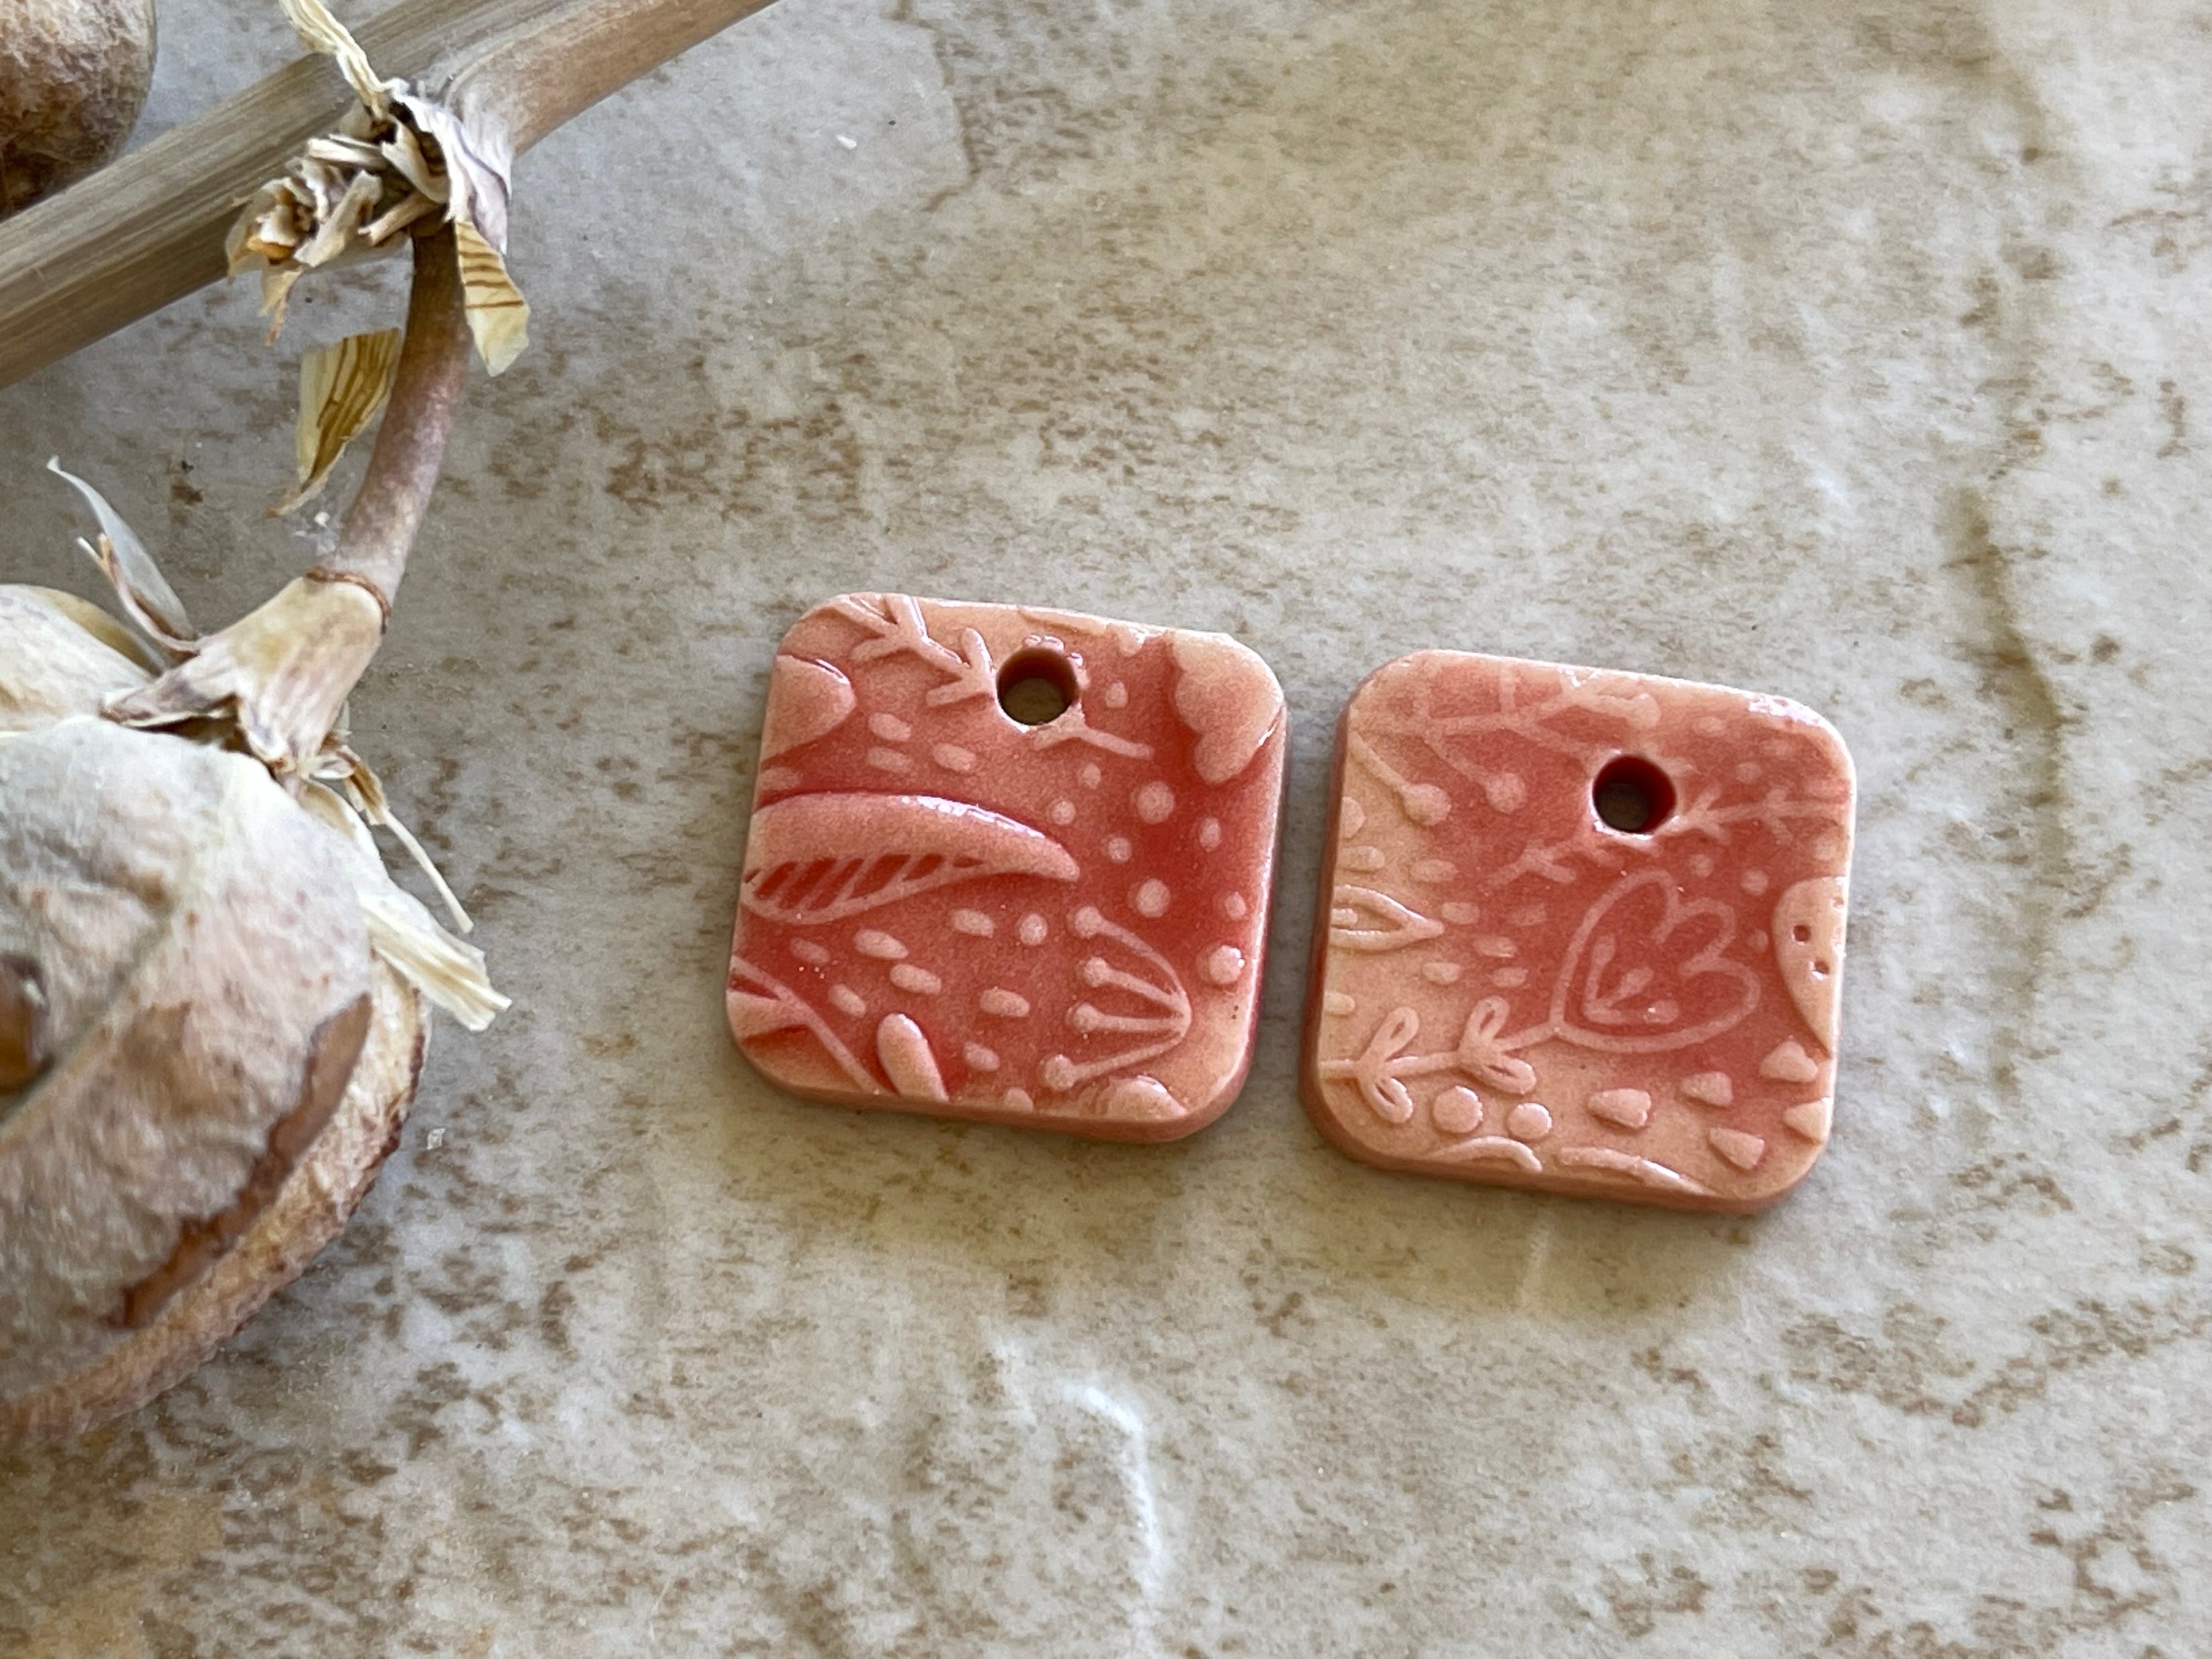 Red Square, Earring Bead Pair, Porcelain Charms, Ceramic Charms, Jewelry Making Components, Beading Handmade, DIY Earrings, DIY Beads